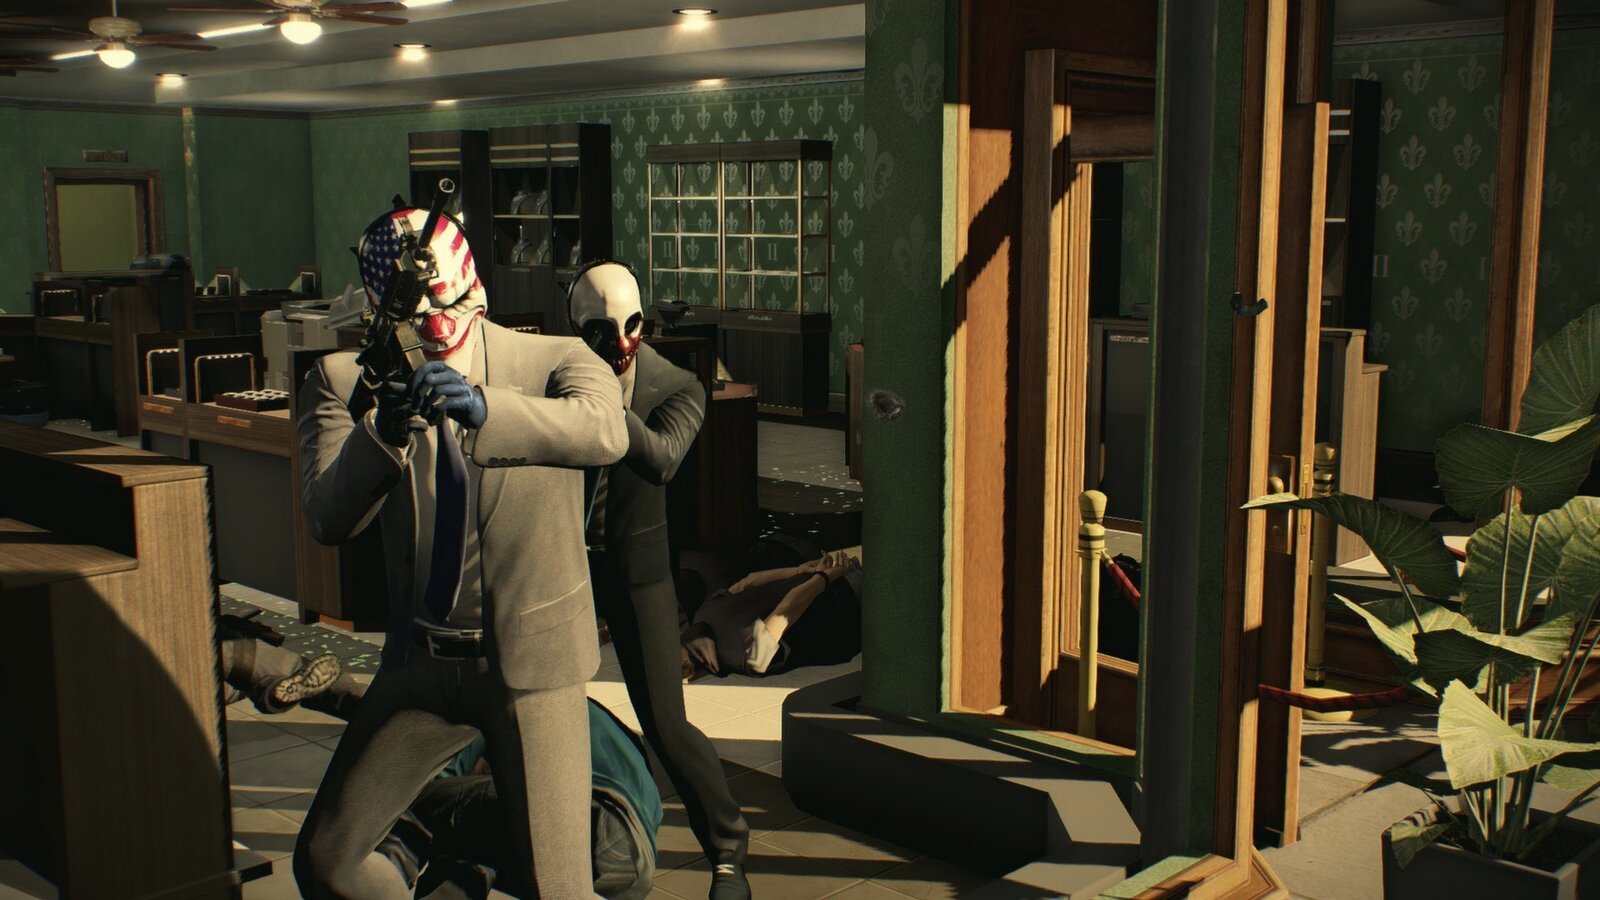 PayDay 2 - Legacy Collection